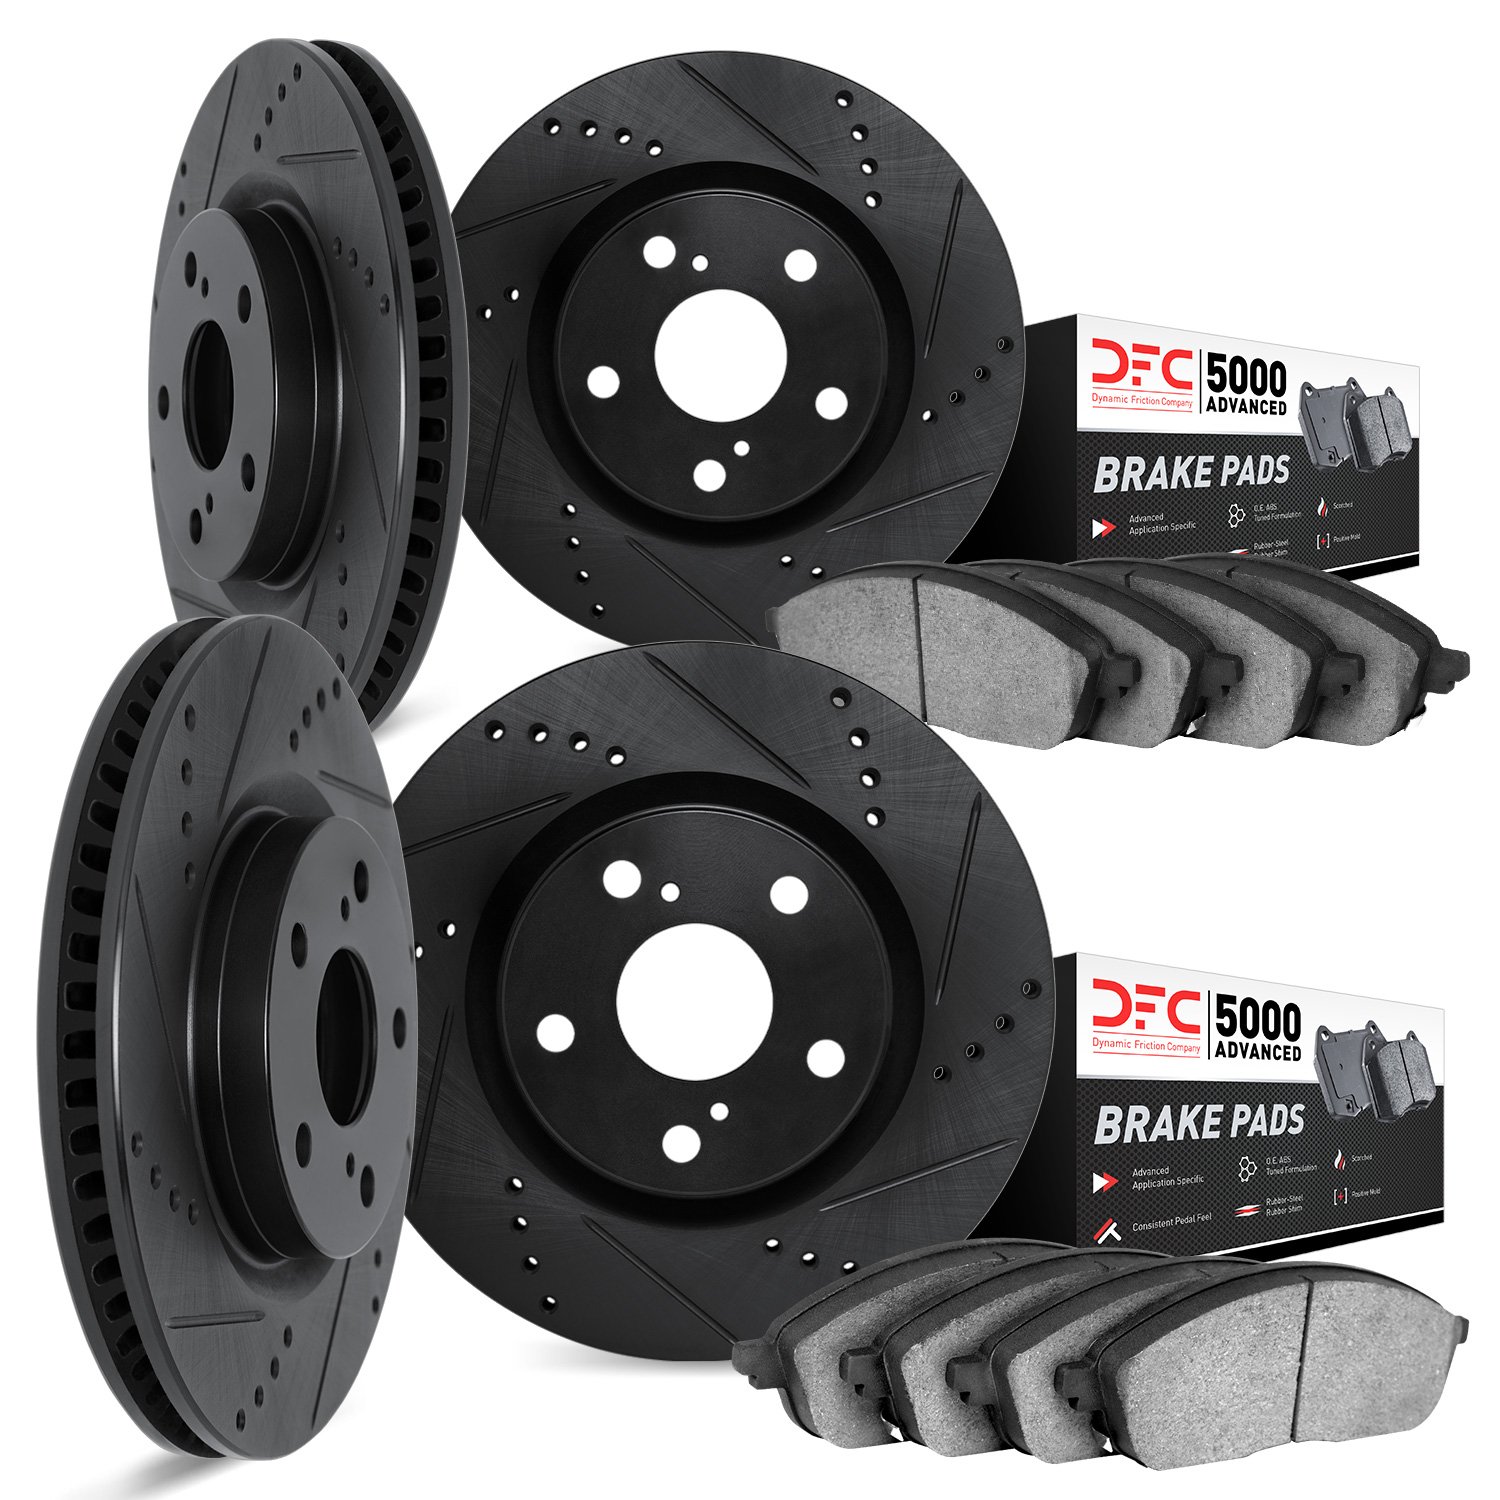 8504-13018 Drilled/Slotted Brake Rotors w/5000 Advanced Brake Pads Kit [Black], Fits Select Subaru, Position: Front and Rear